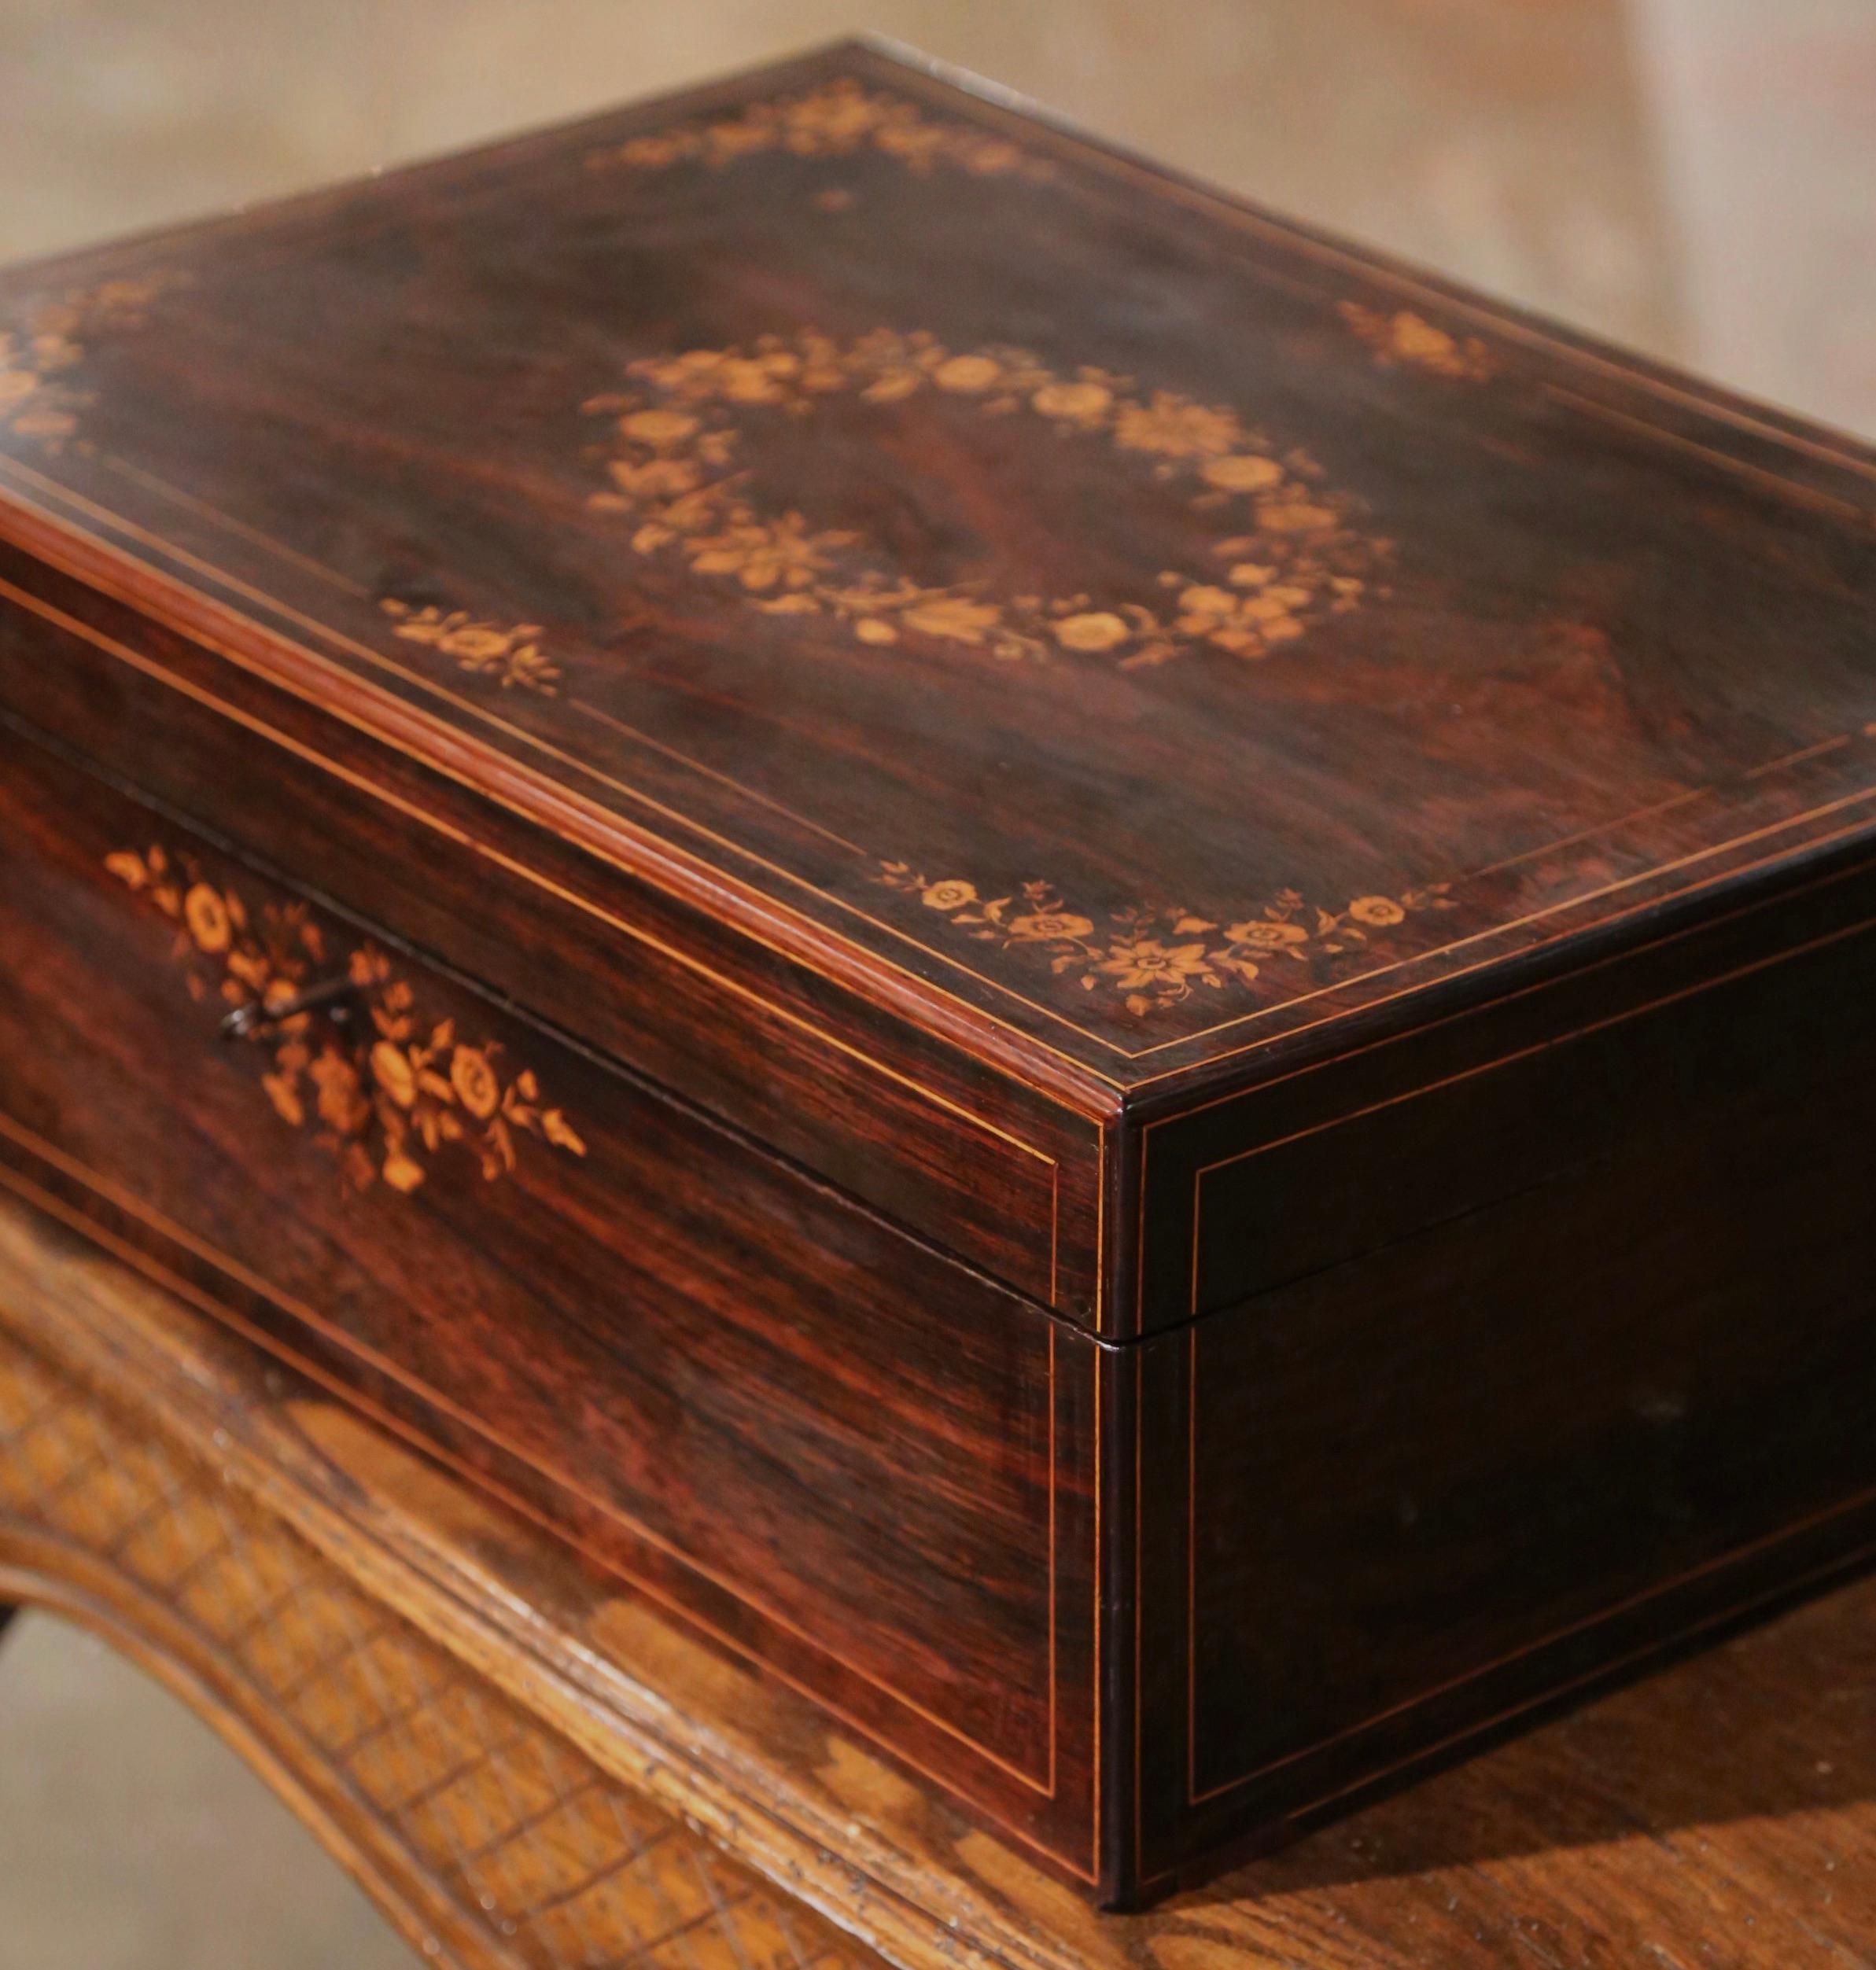 19th Century French Napoleon III Floral Inlaid Rosewood Decorative Jewelry Box In Excellent Condition For Sale In Dallas, TX